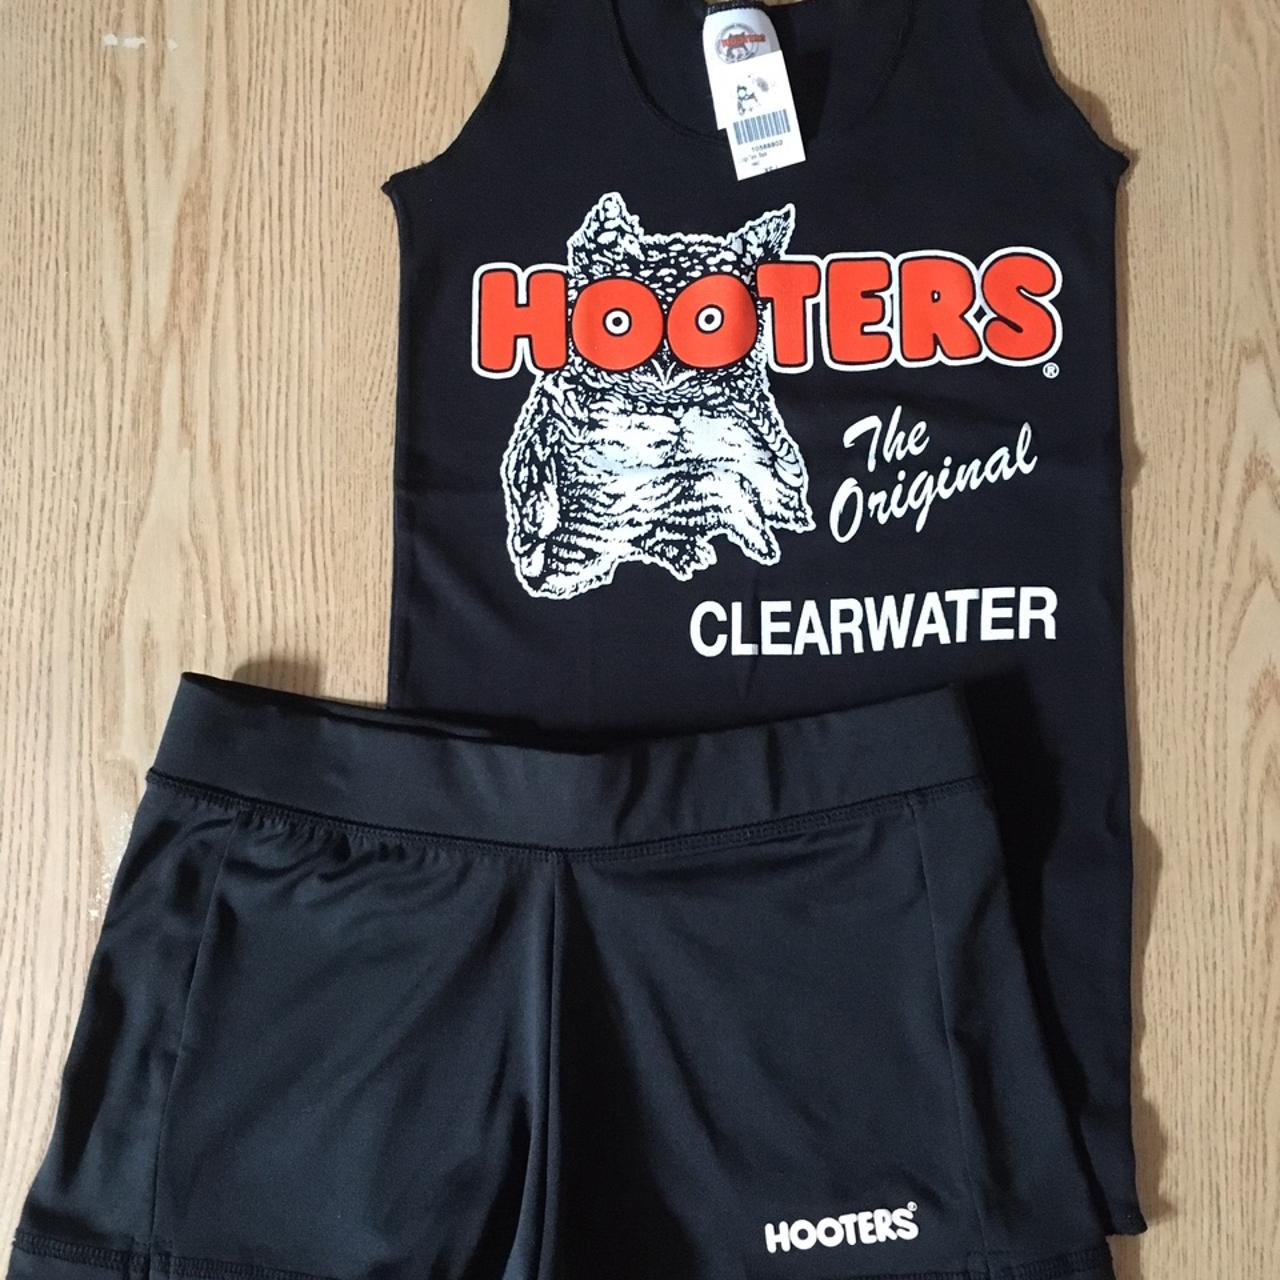 New Hooters Girl Uniform Bundle Included in this - Depop